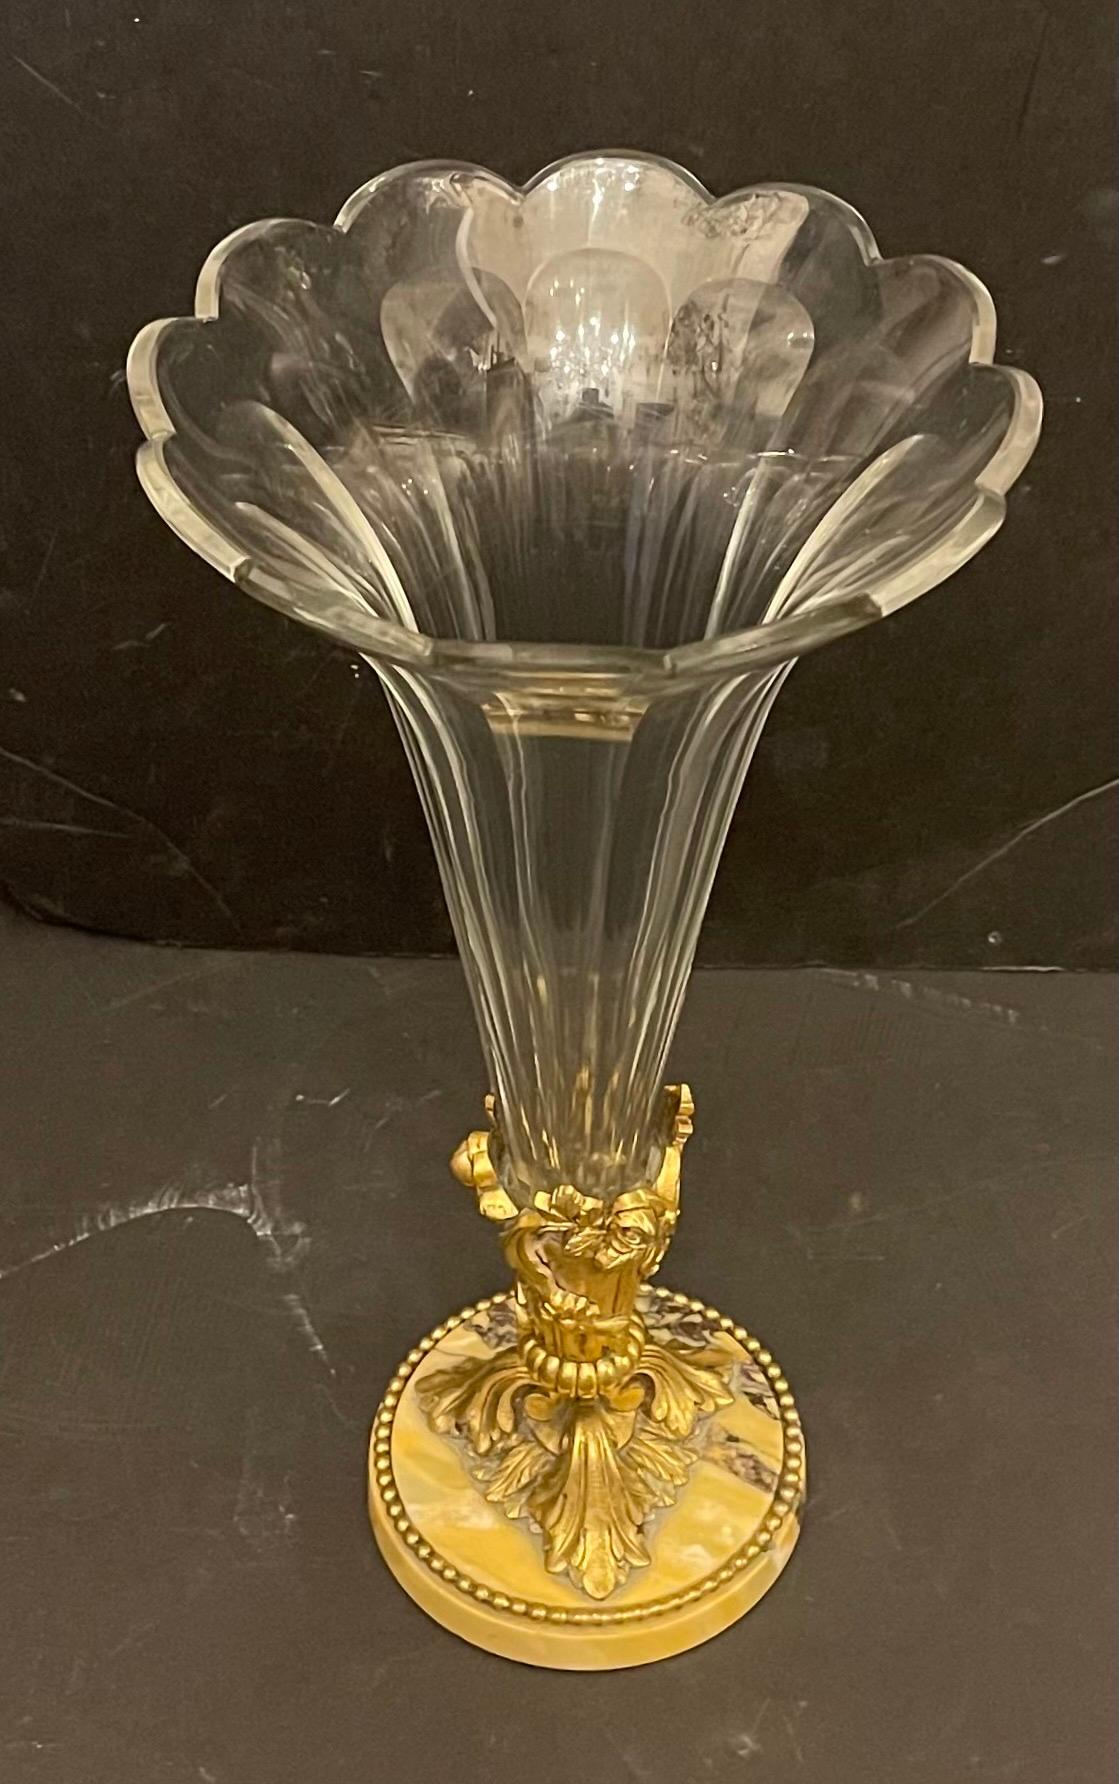 A wonderful very fine French Baccarat Style Dore Bronze with flowers & Filigree Ormolu mounted on marble base fitted with a large cut crystal vase.